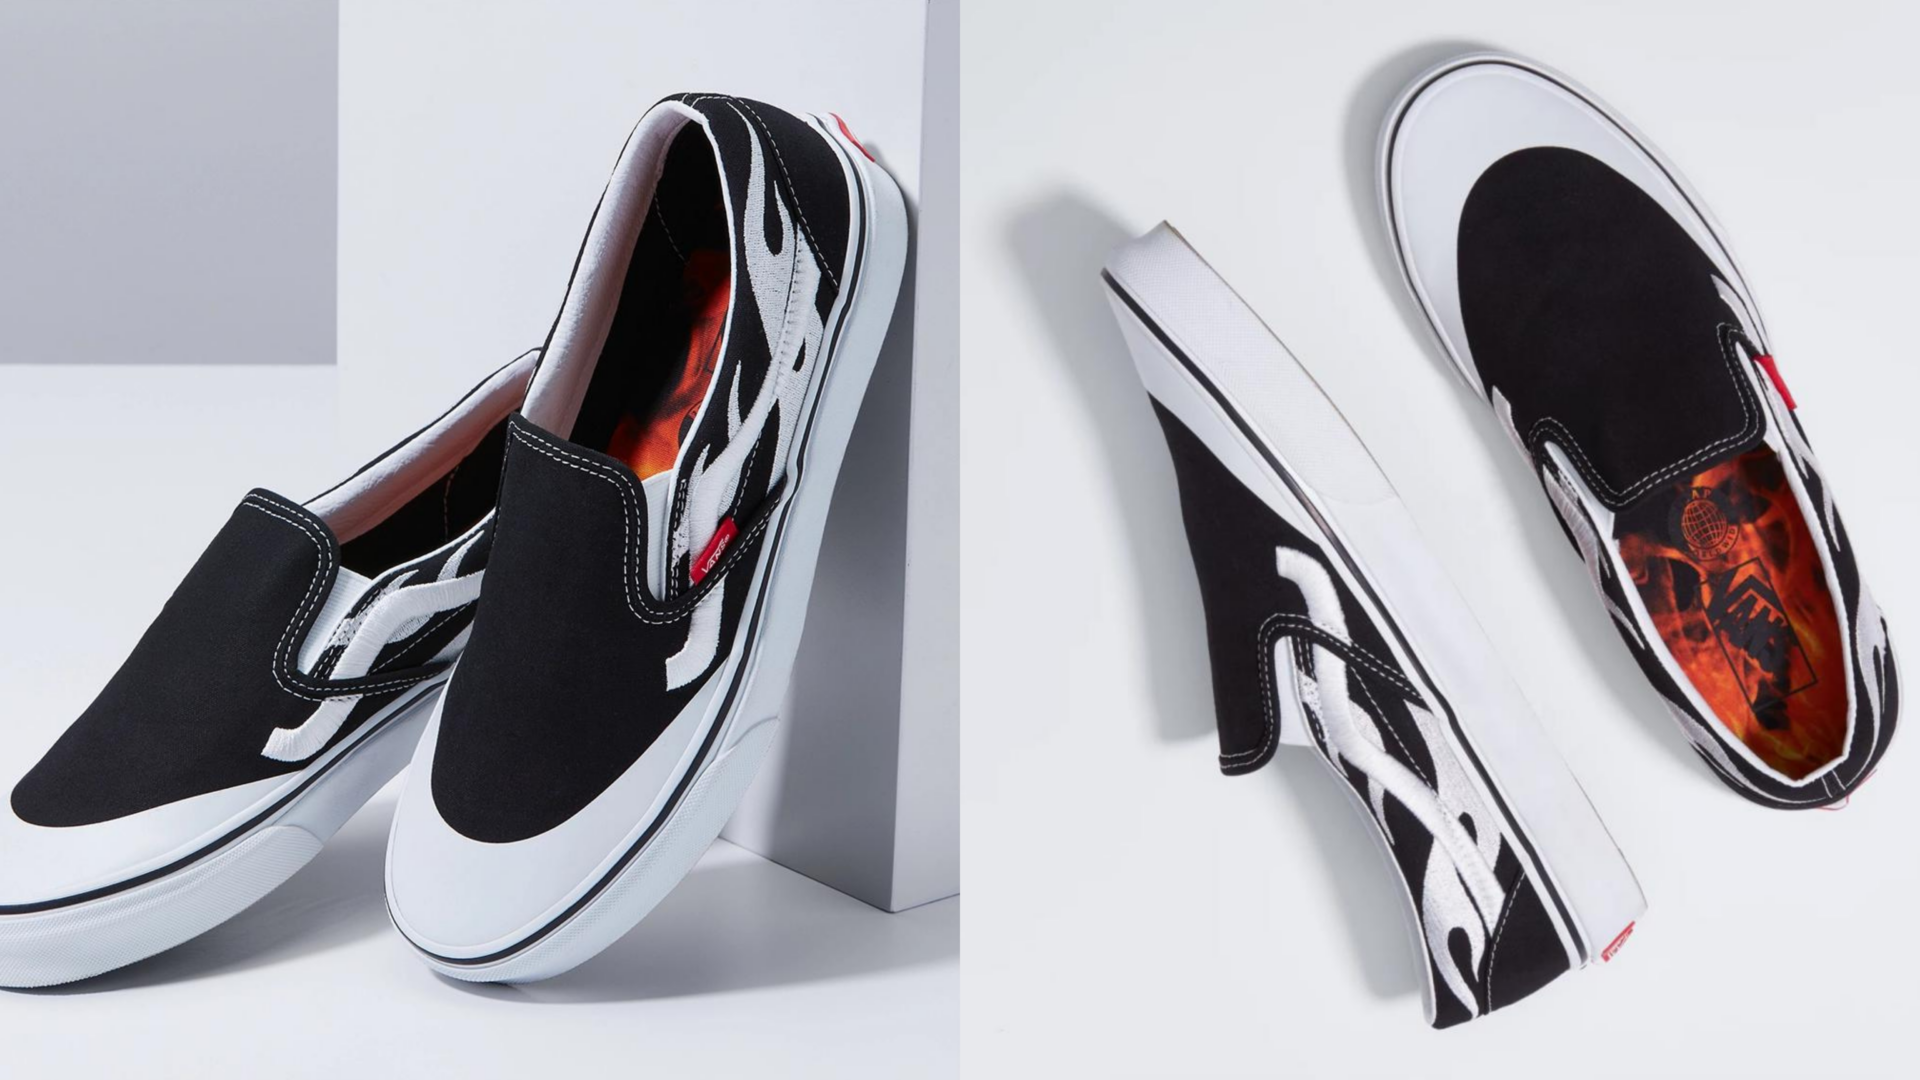 A$AP Rocky's flaming hot Vans collaboration is about to drop